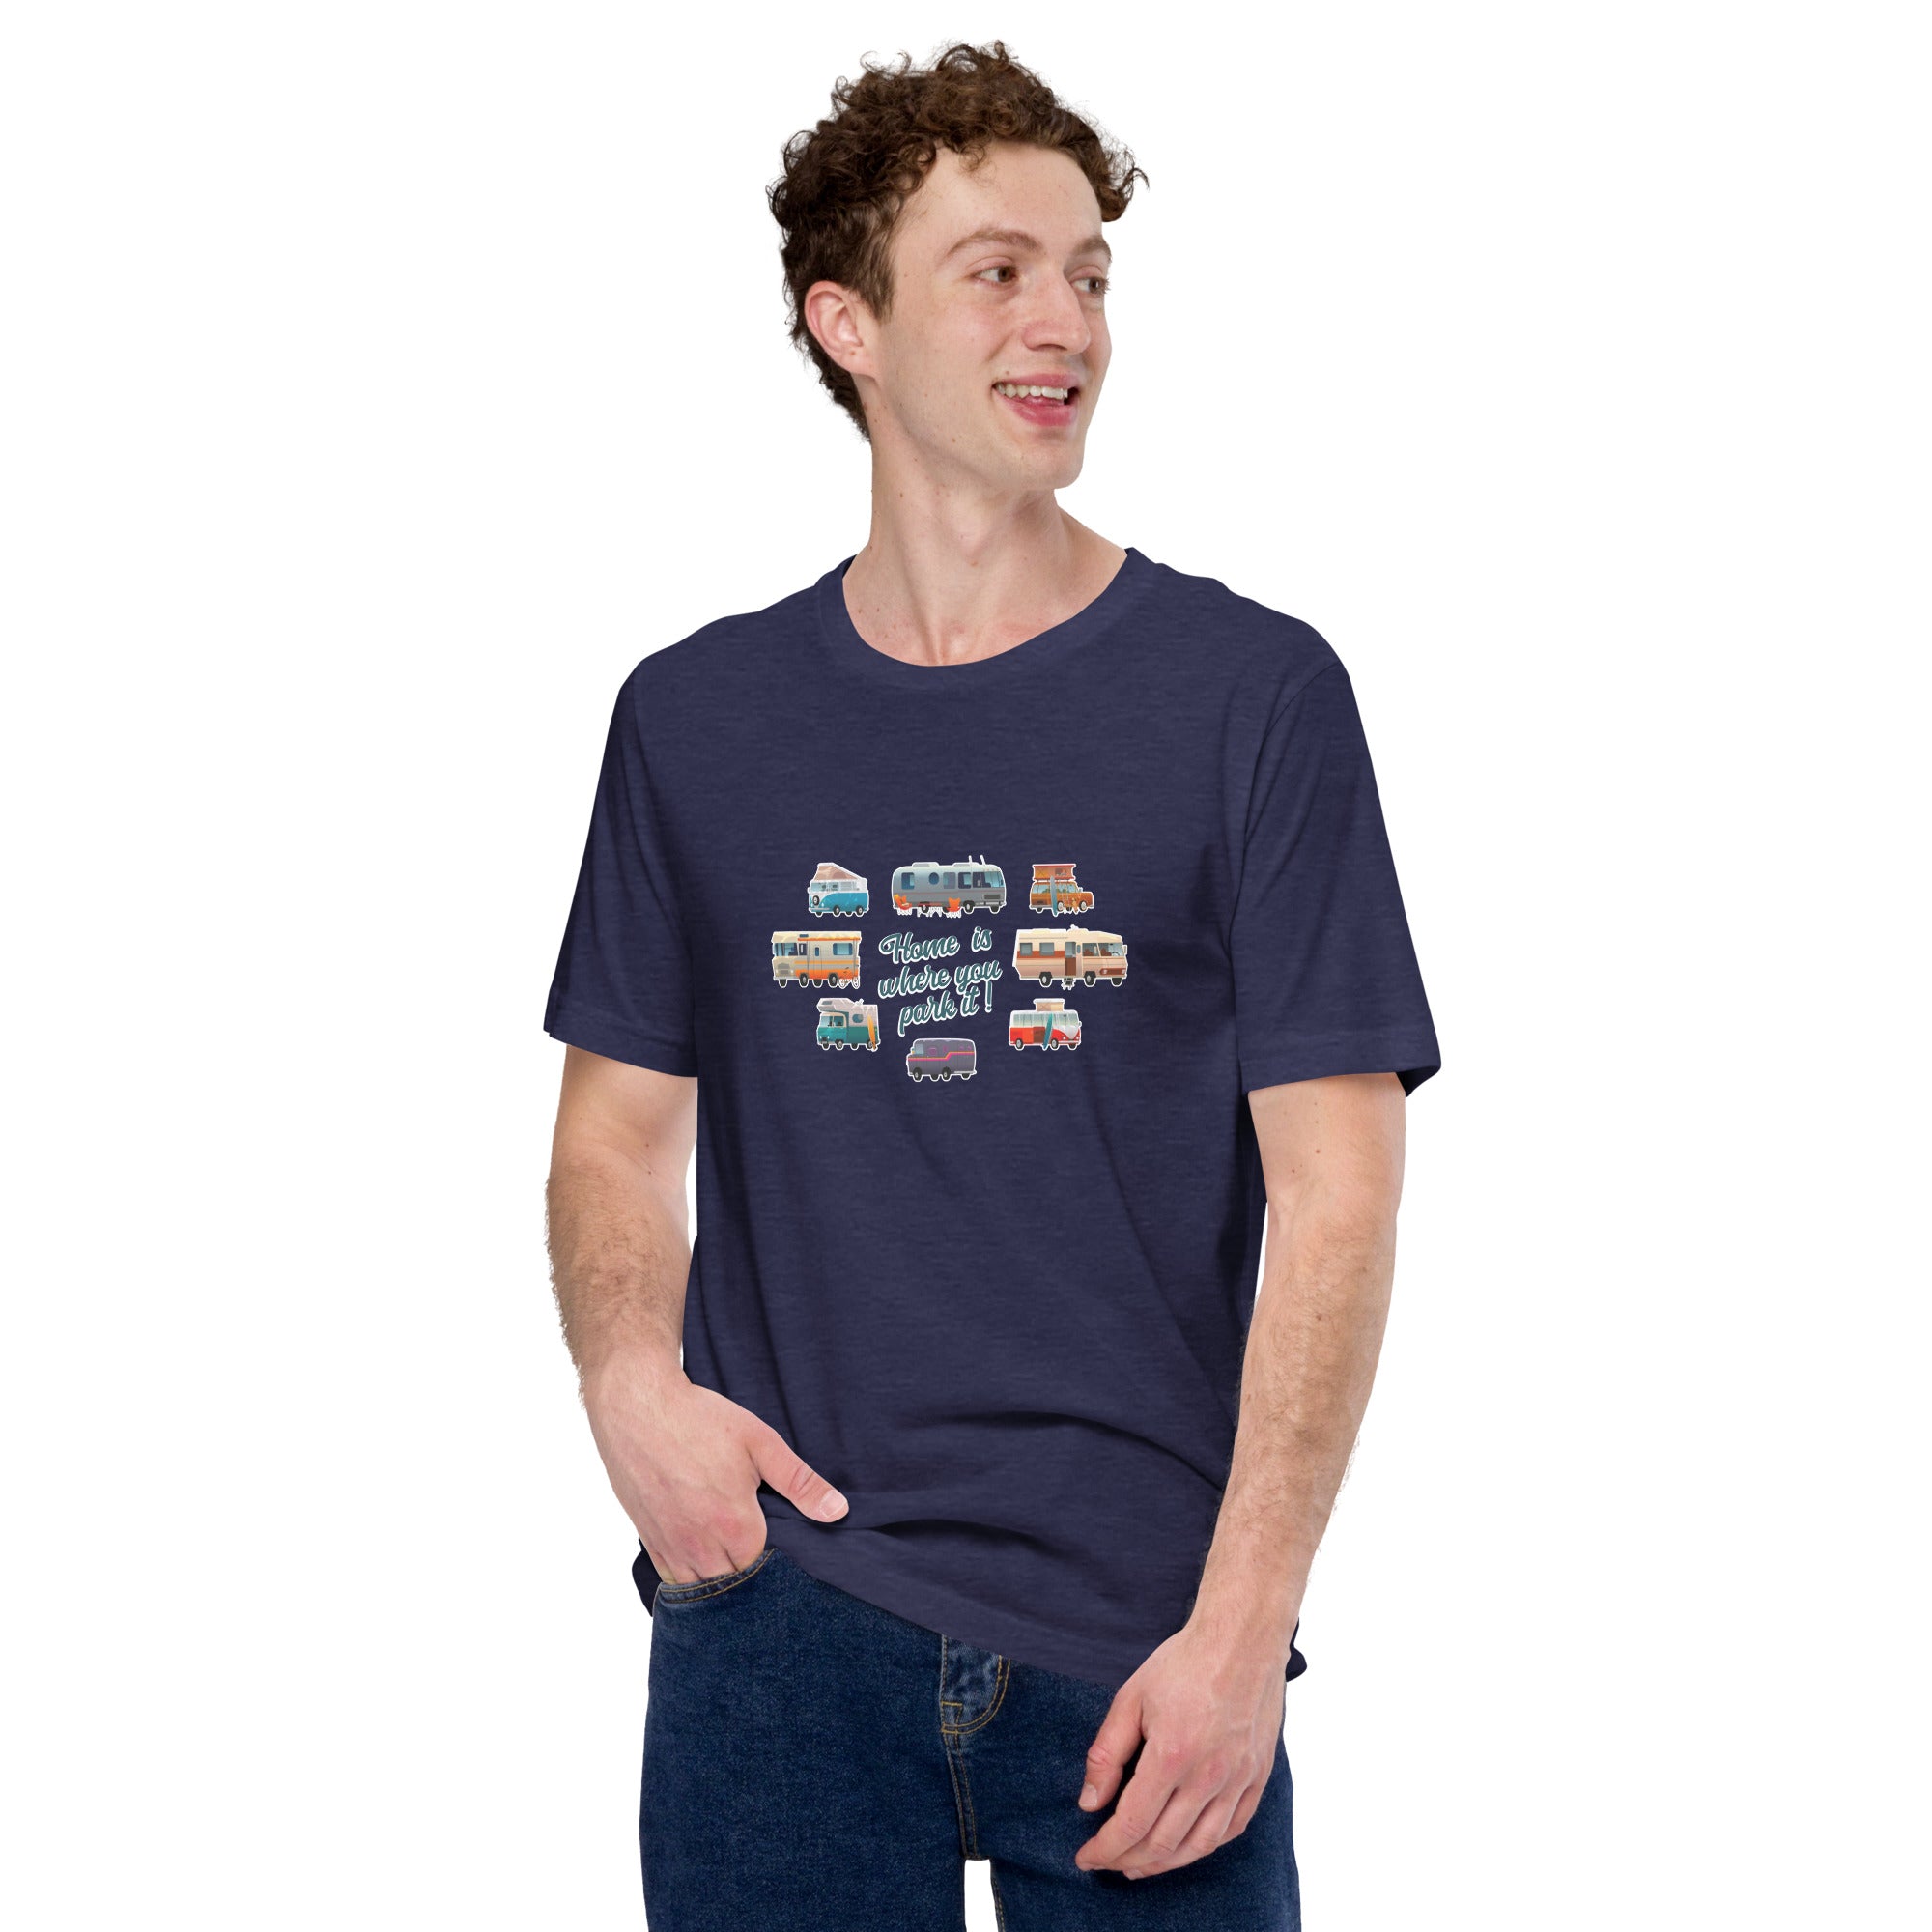 Unisex t-shirt Square Vintage Campers on dark heather colors